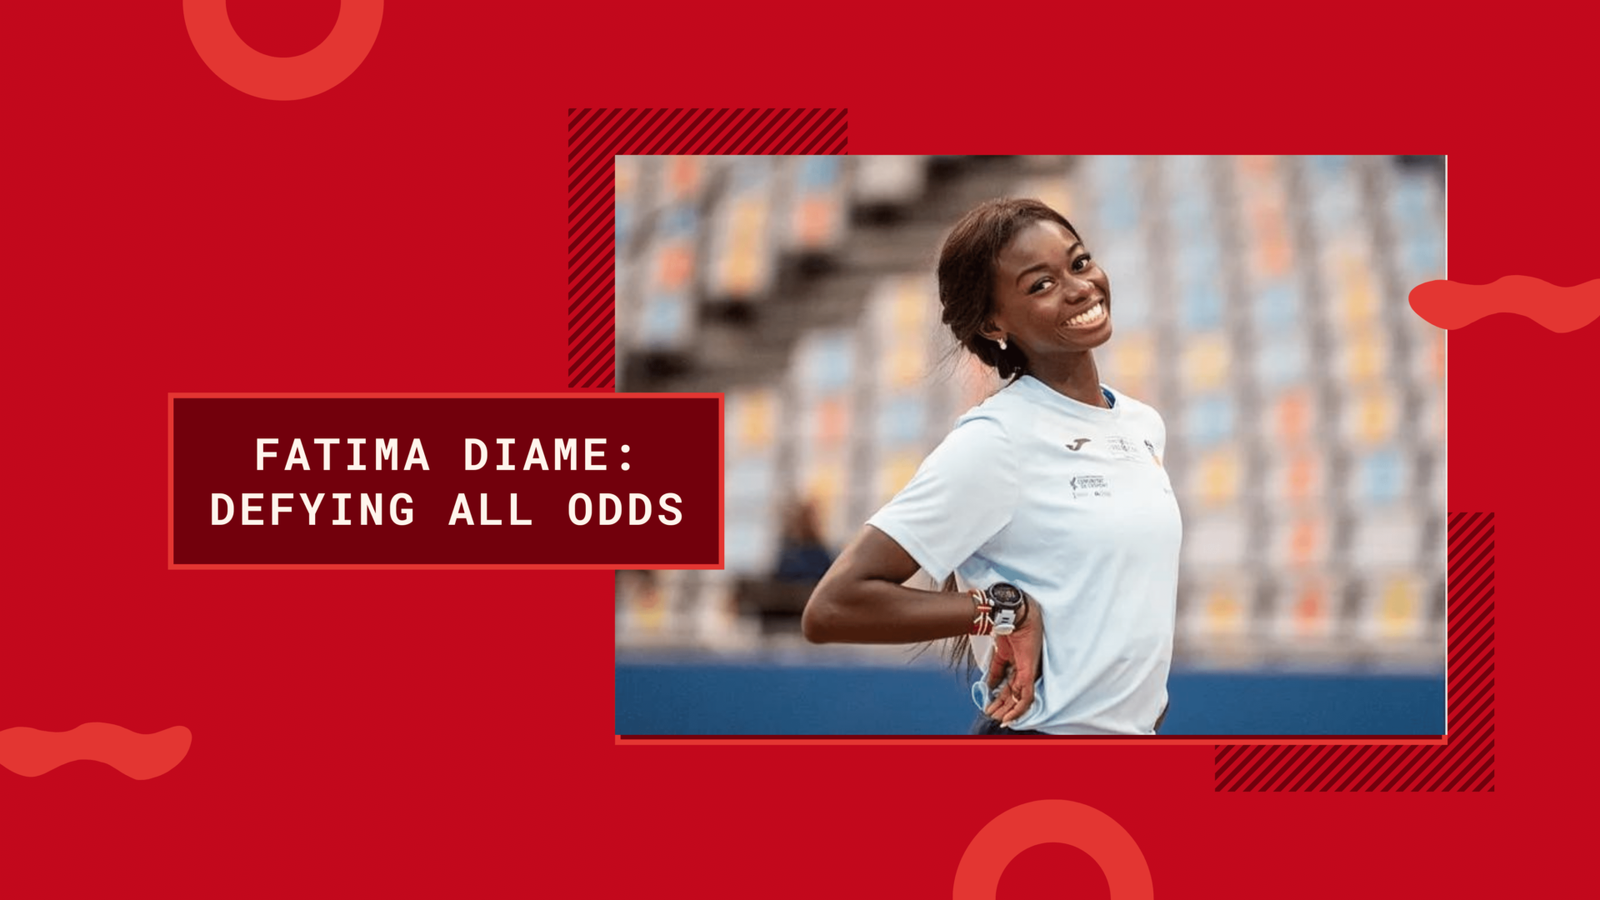 Fatima Diame The Inspiring Story of the Spanish-Senegalese Athlete Who Defied All Odds